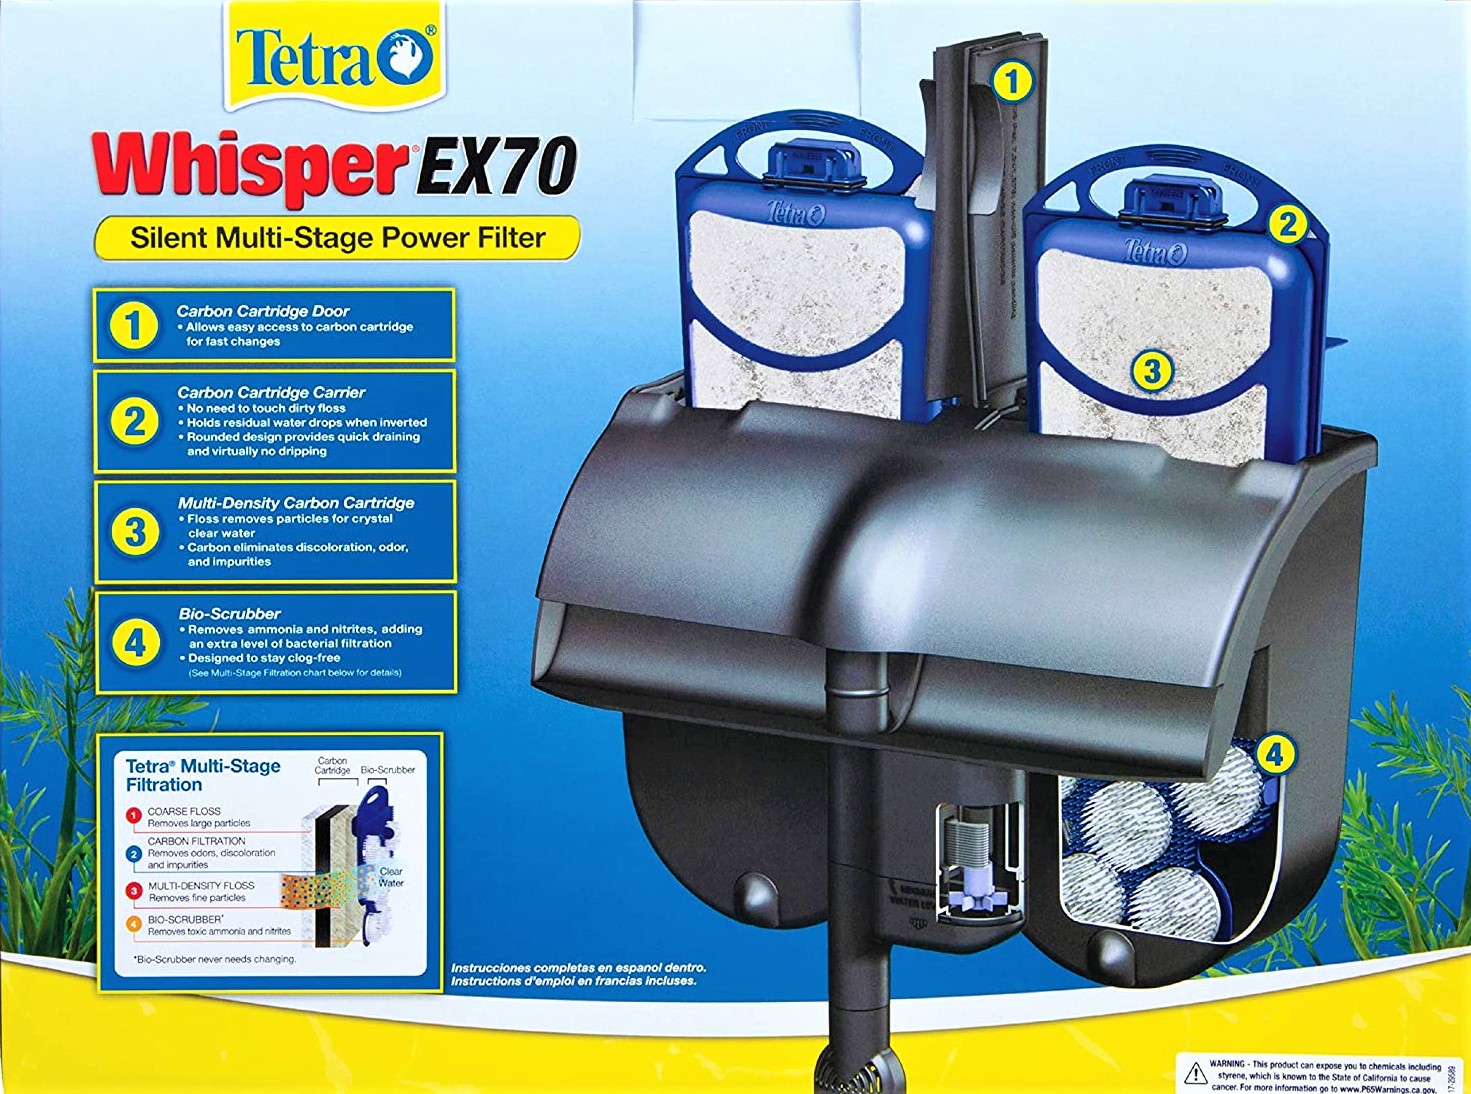 Tetra Whisper EX 70 Filter For 45 To 70 Gallon aquariums, Silent Multi-Stage Filtration